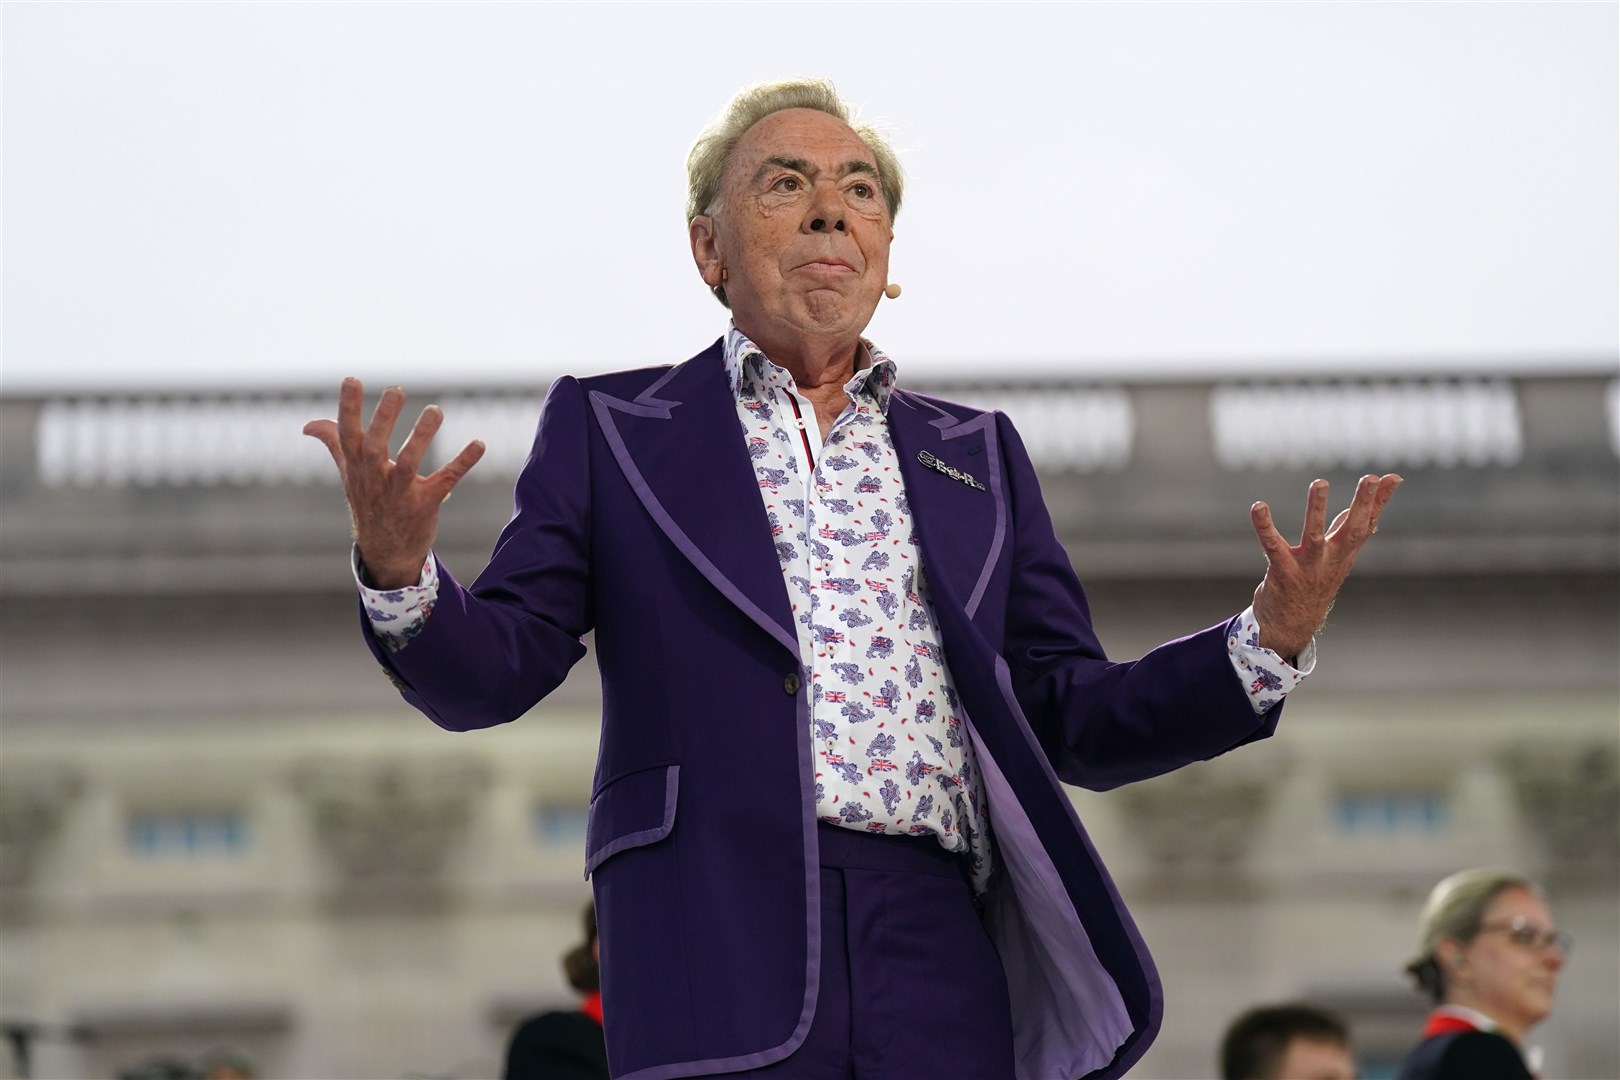 Andrew Lloyd Webber received criticism over a letter he wrote to be read out at the final performance of Cinderella in the West End (Joe Giddens/PA)